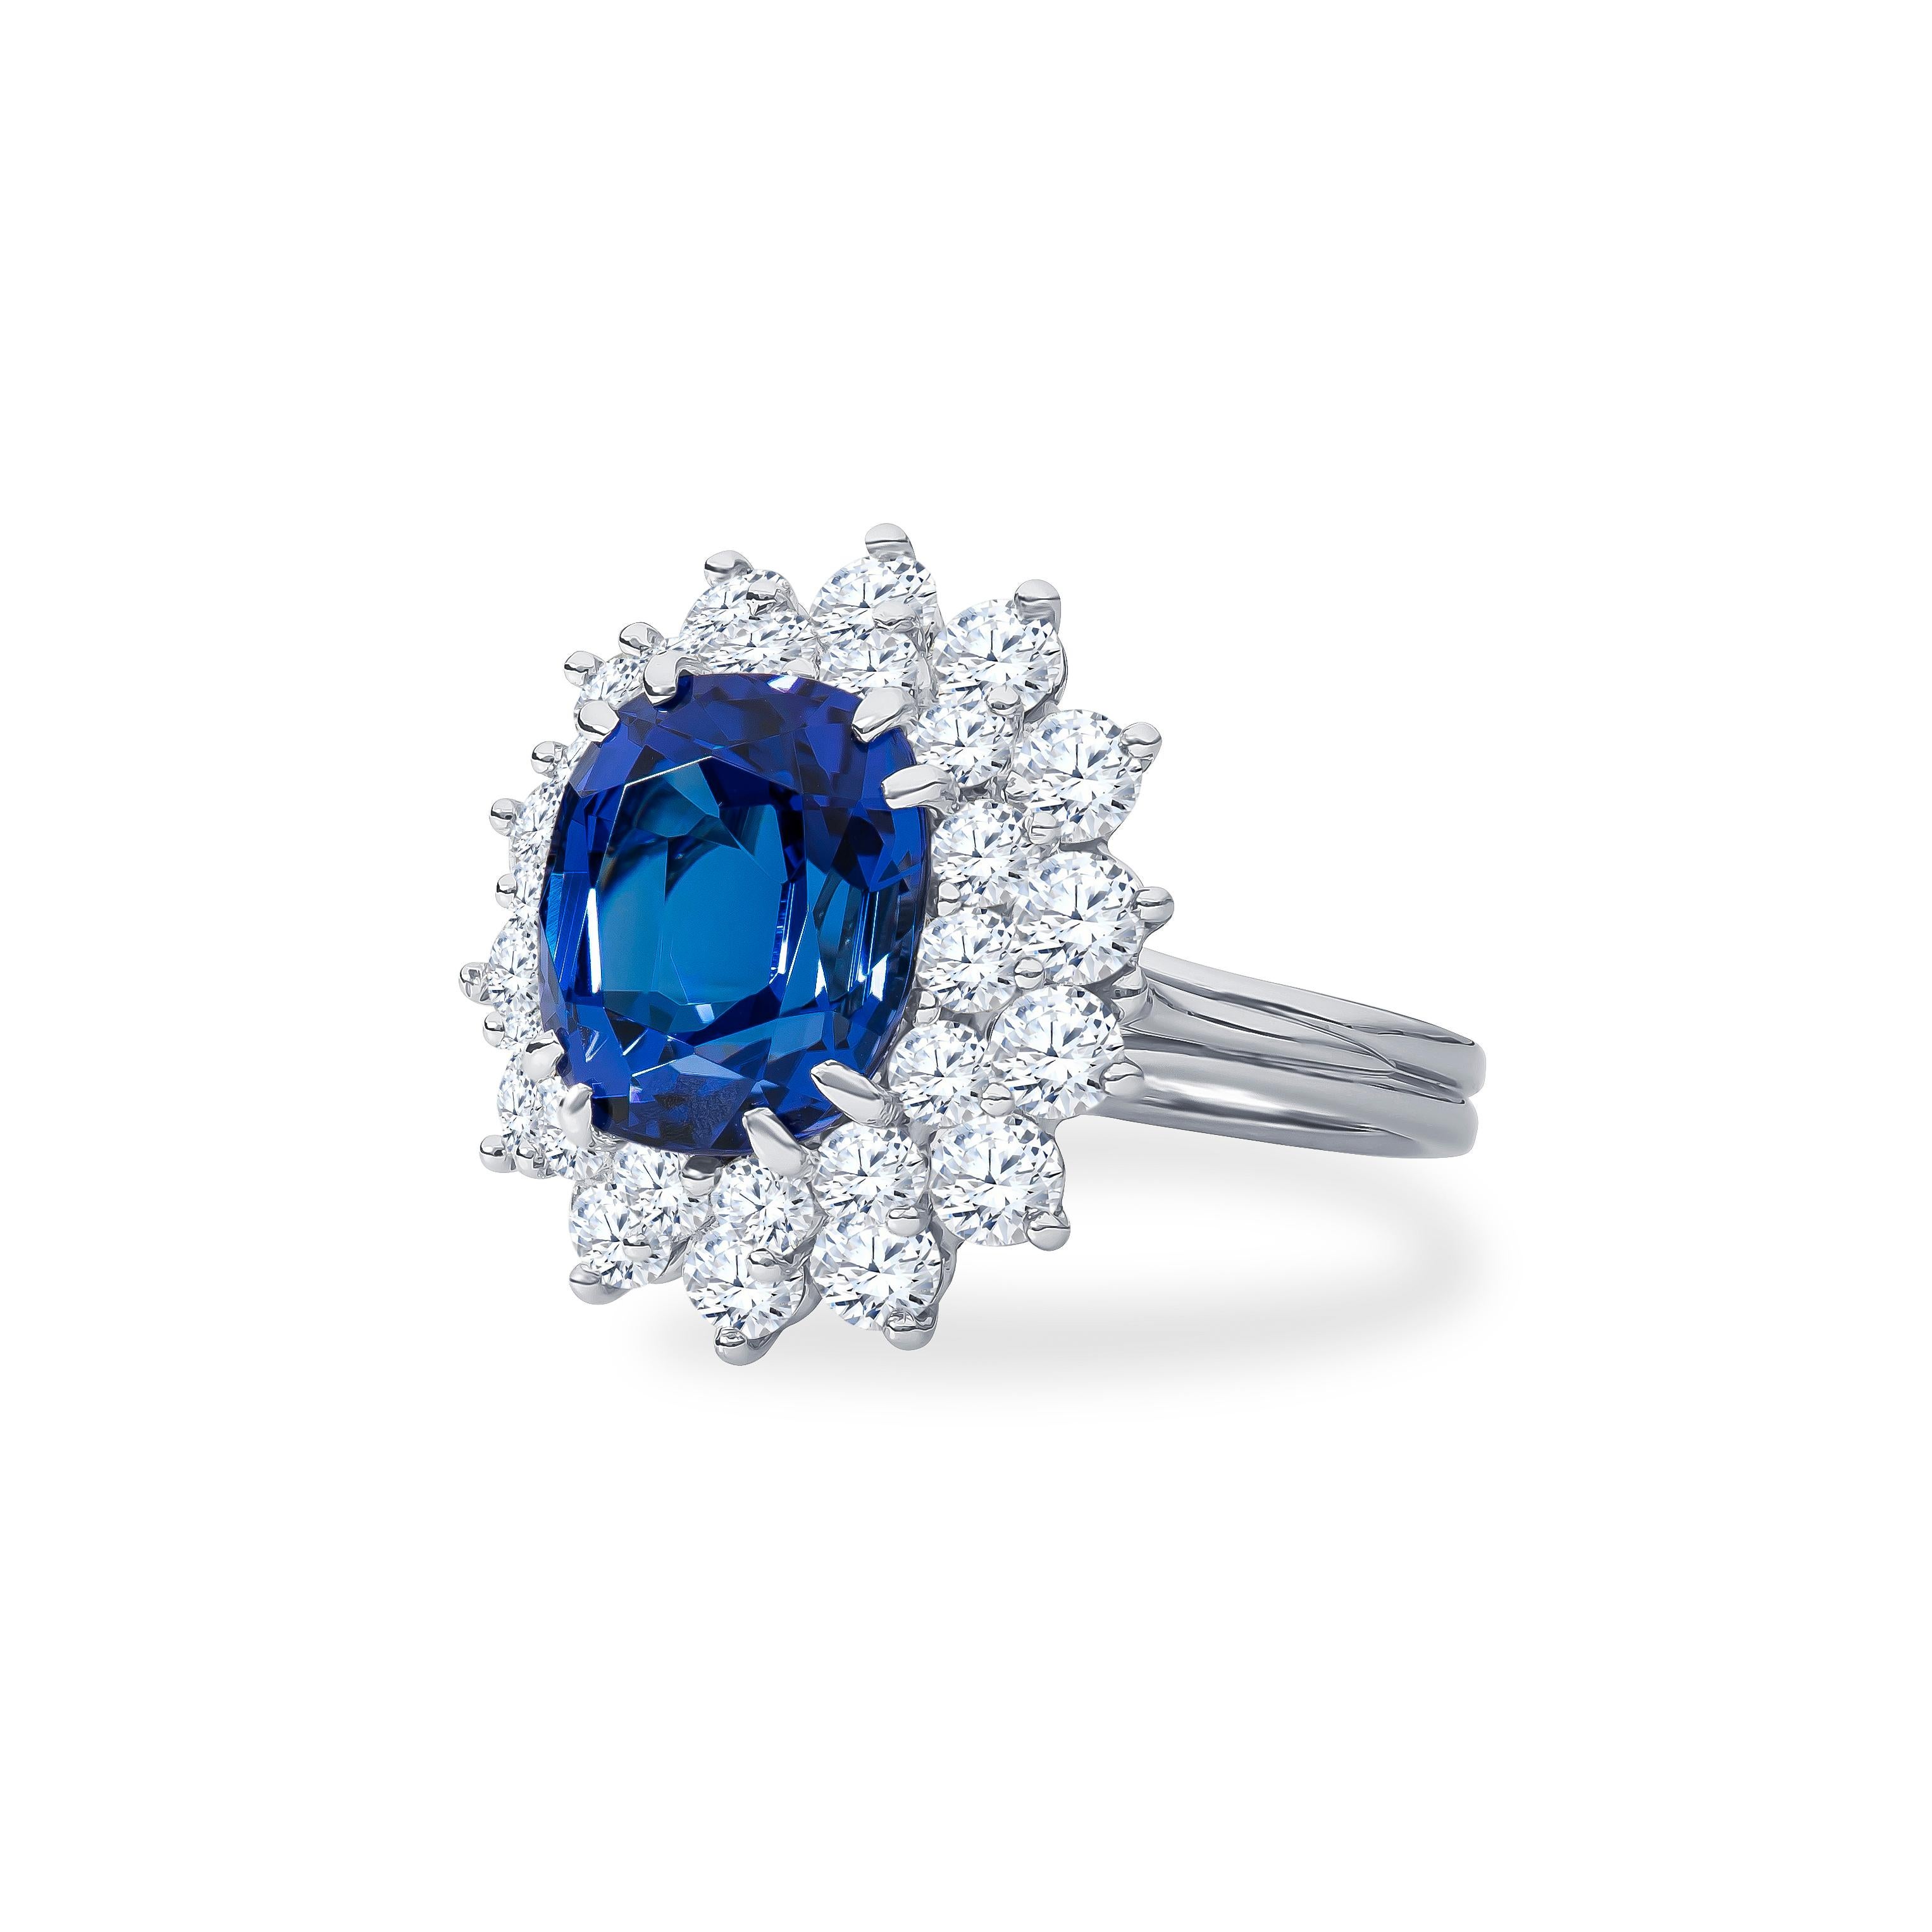 Stunning Tiffany and Co. Tanzanite ring with approximately 3.90 carat total weight & 1.60 carat total weight in fine round brilliant diamonds. Tanzanite is a highly desirable nearly pure blue hue and extremely fine. Ring size 5.25, size may be